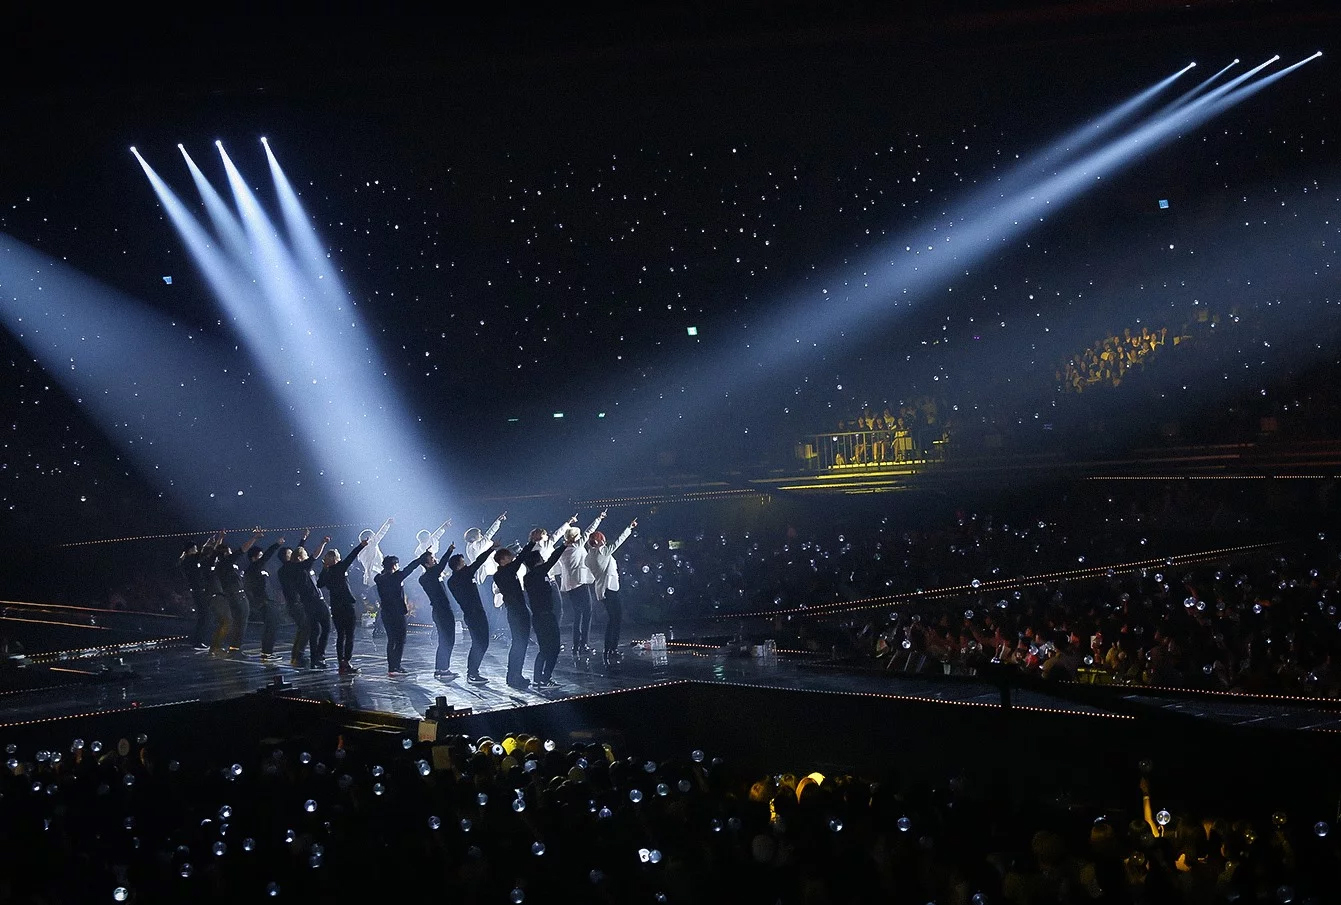 Dancers on a stage are lit by spotlights and surrounded by an arena of spectators.